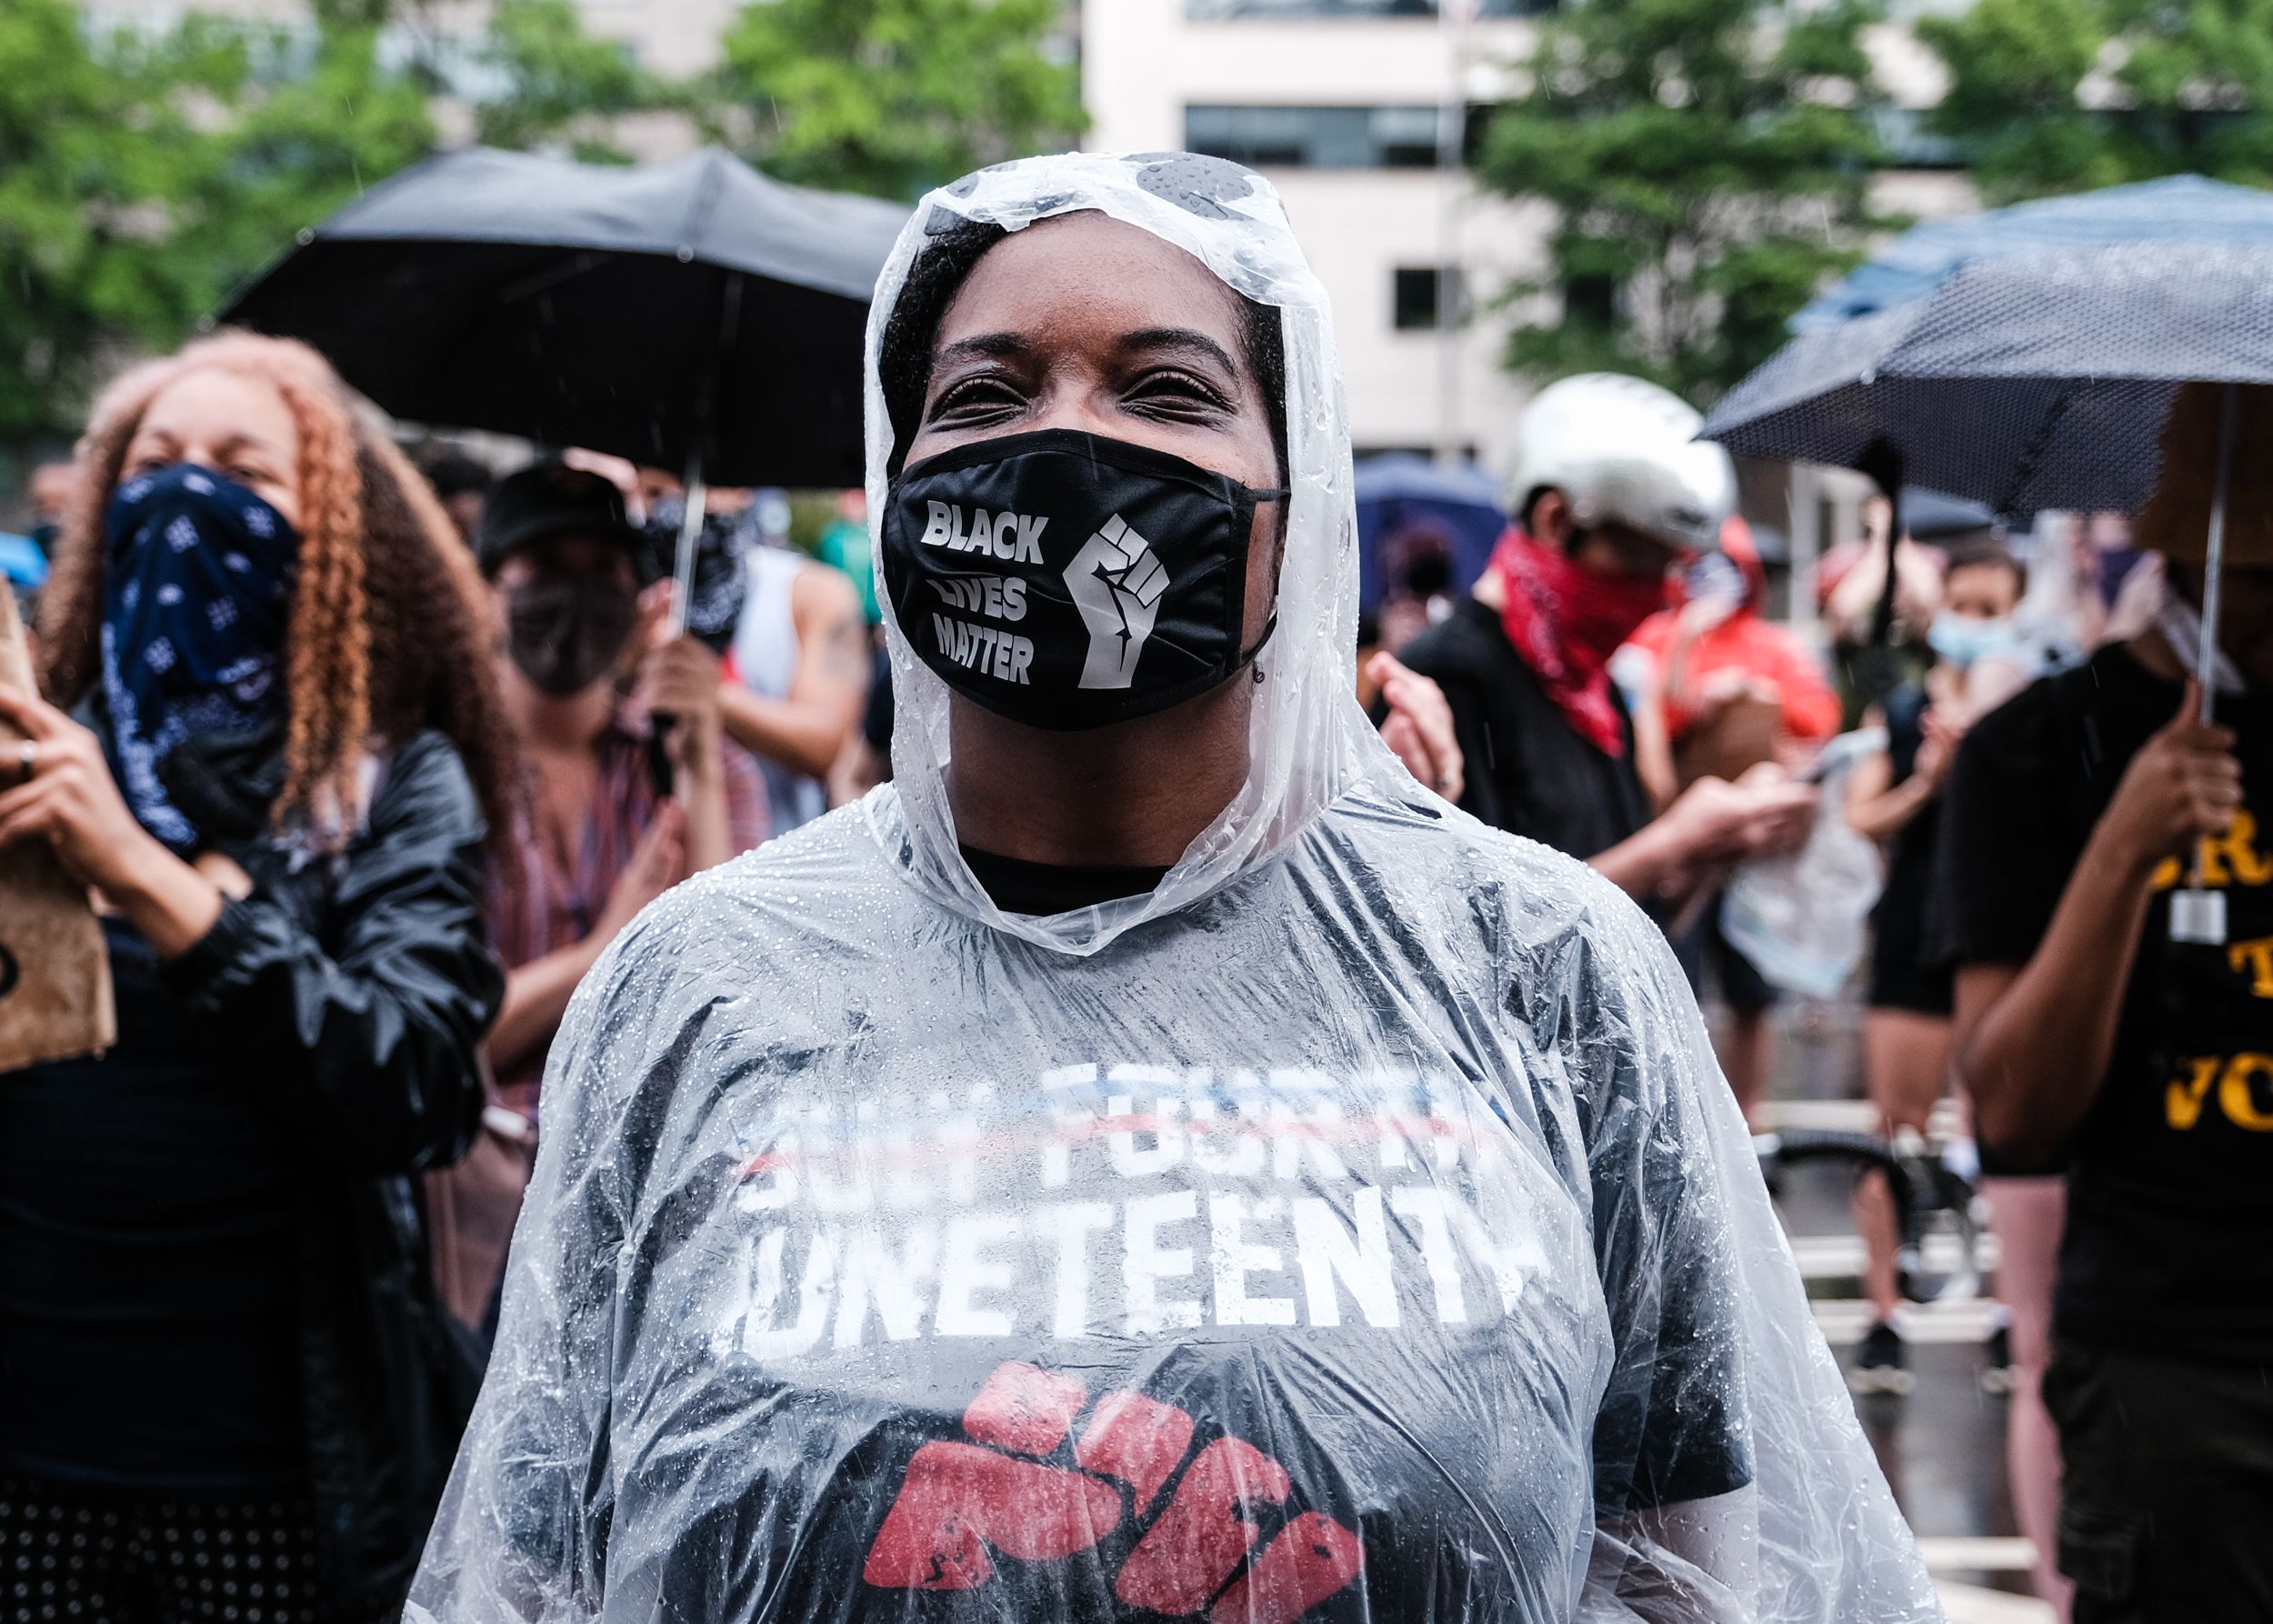 Protesters gather in Washington, D.C., to support Black Lives Matter and to Juneteenth in 2020.